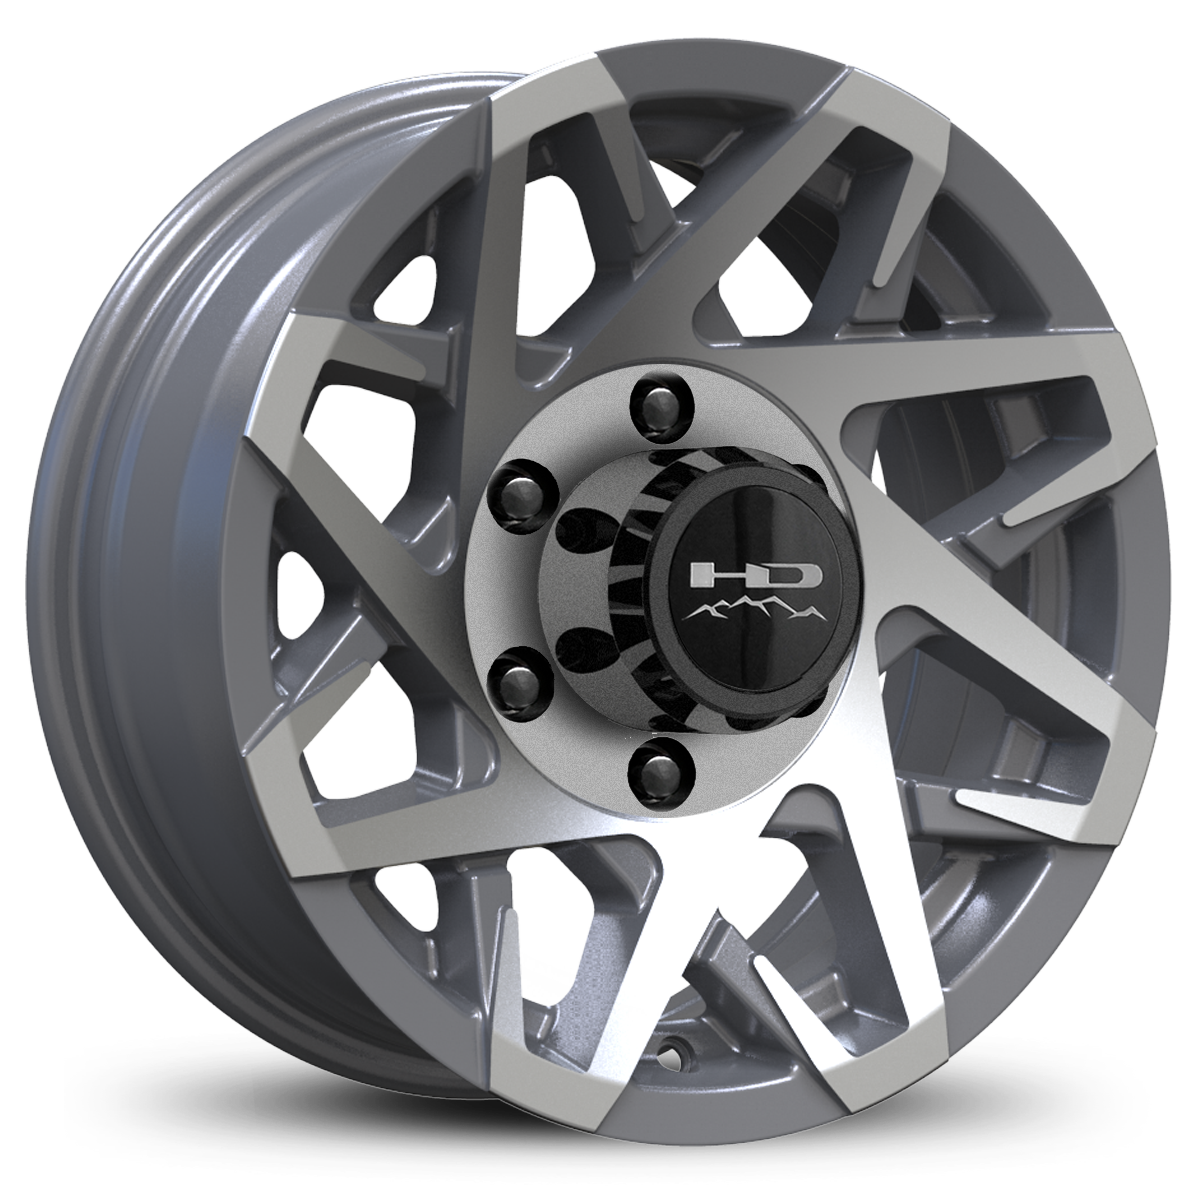 HD Off-Road Canyon Custom Trailer Wheel Rims in 15x6.0  15x6 Gloss Gunmetal Machined Face with Center Cap & Logo fits 6x5.50 / 6x139.7 Axle Boat, Car, RV, Travel, Concession, Horse, Utility, Lawn & Garden, & Landscaping.